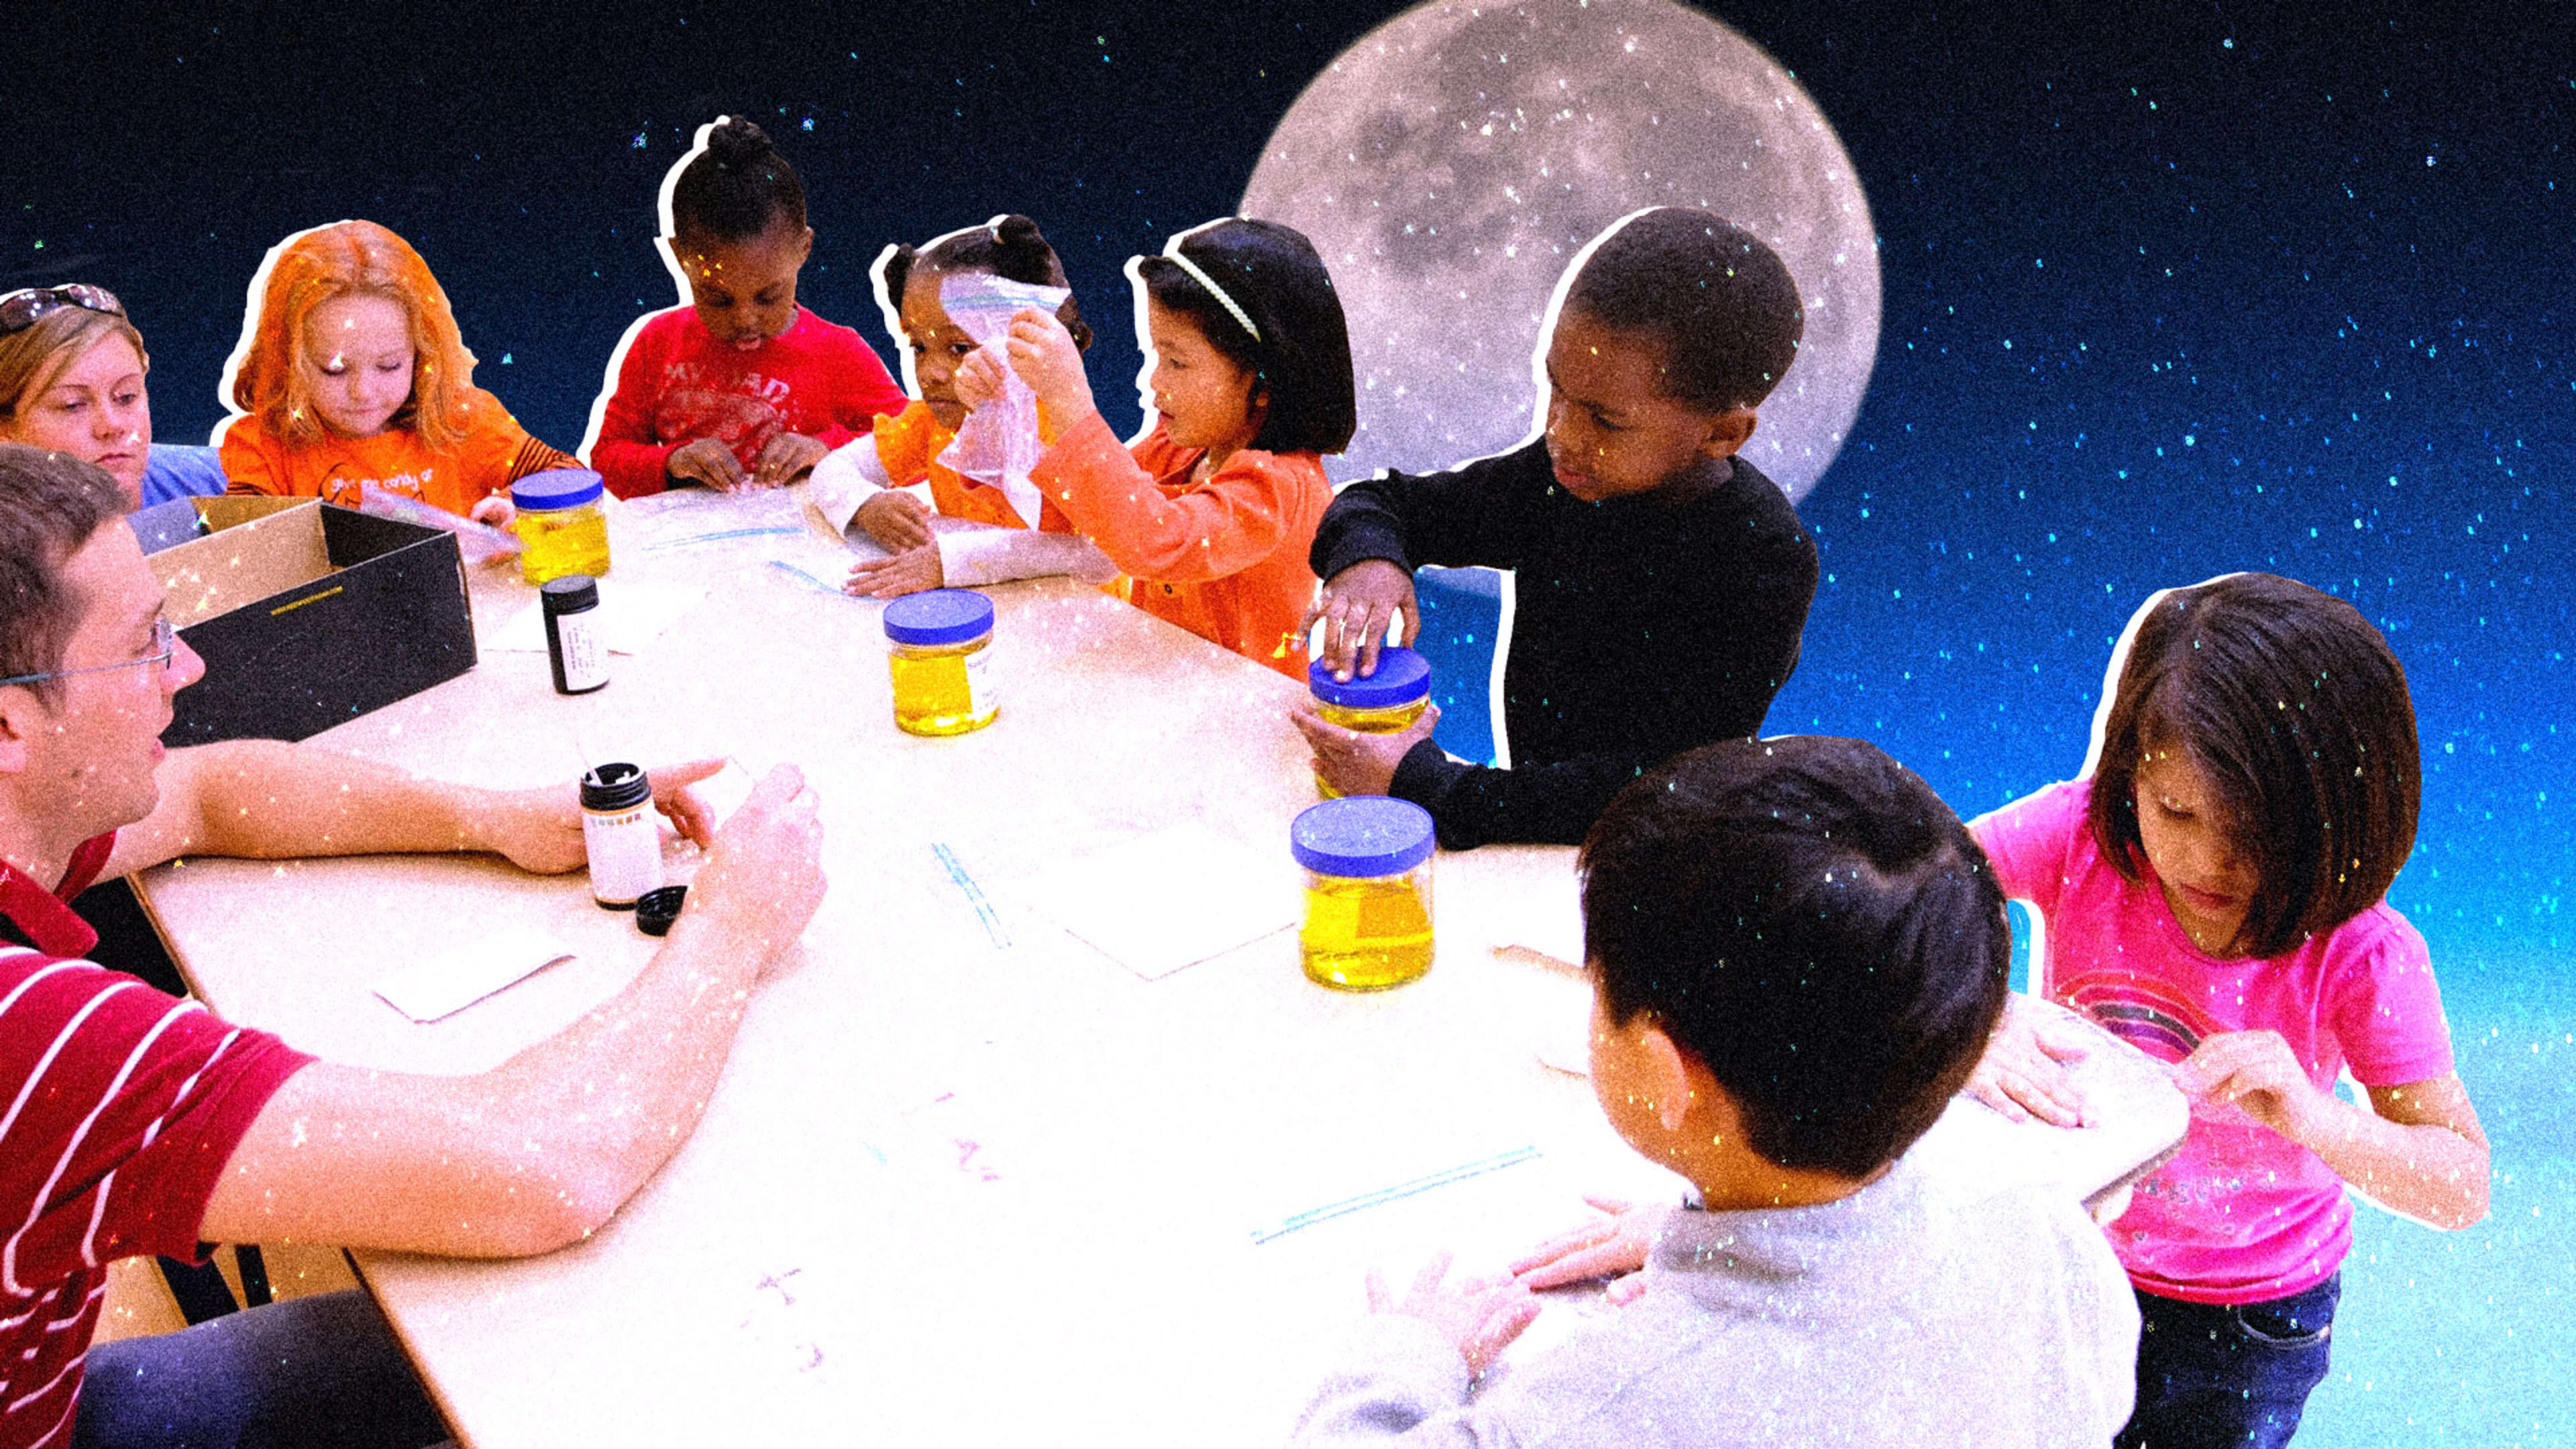 Here’s how we can make sure that every child has the opportunity to go to the moon